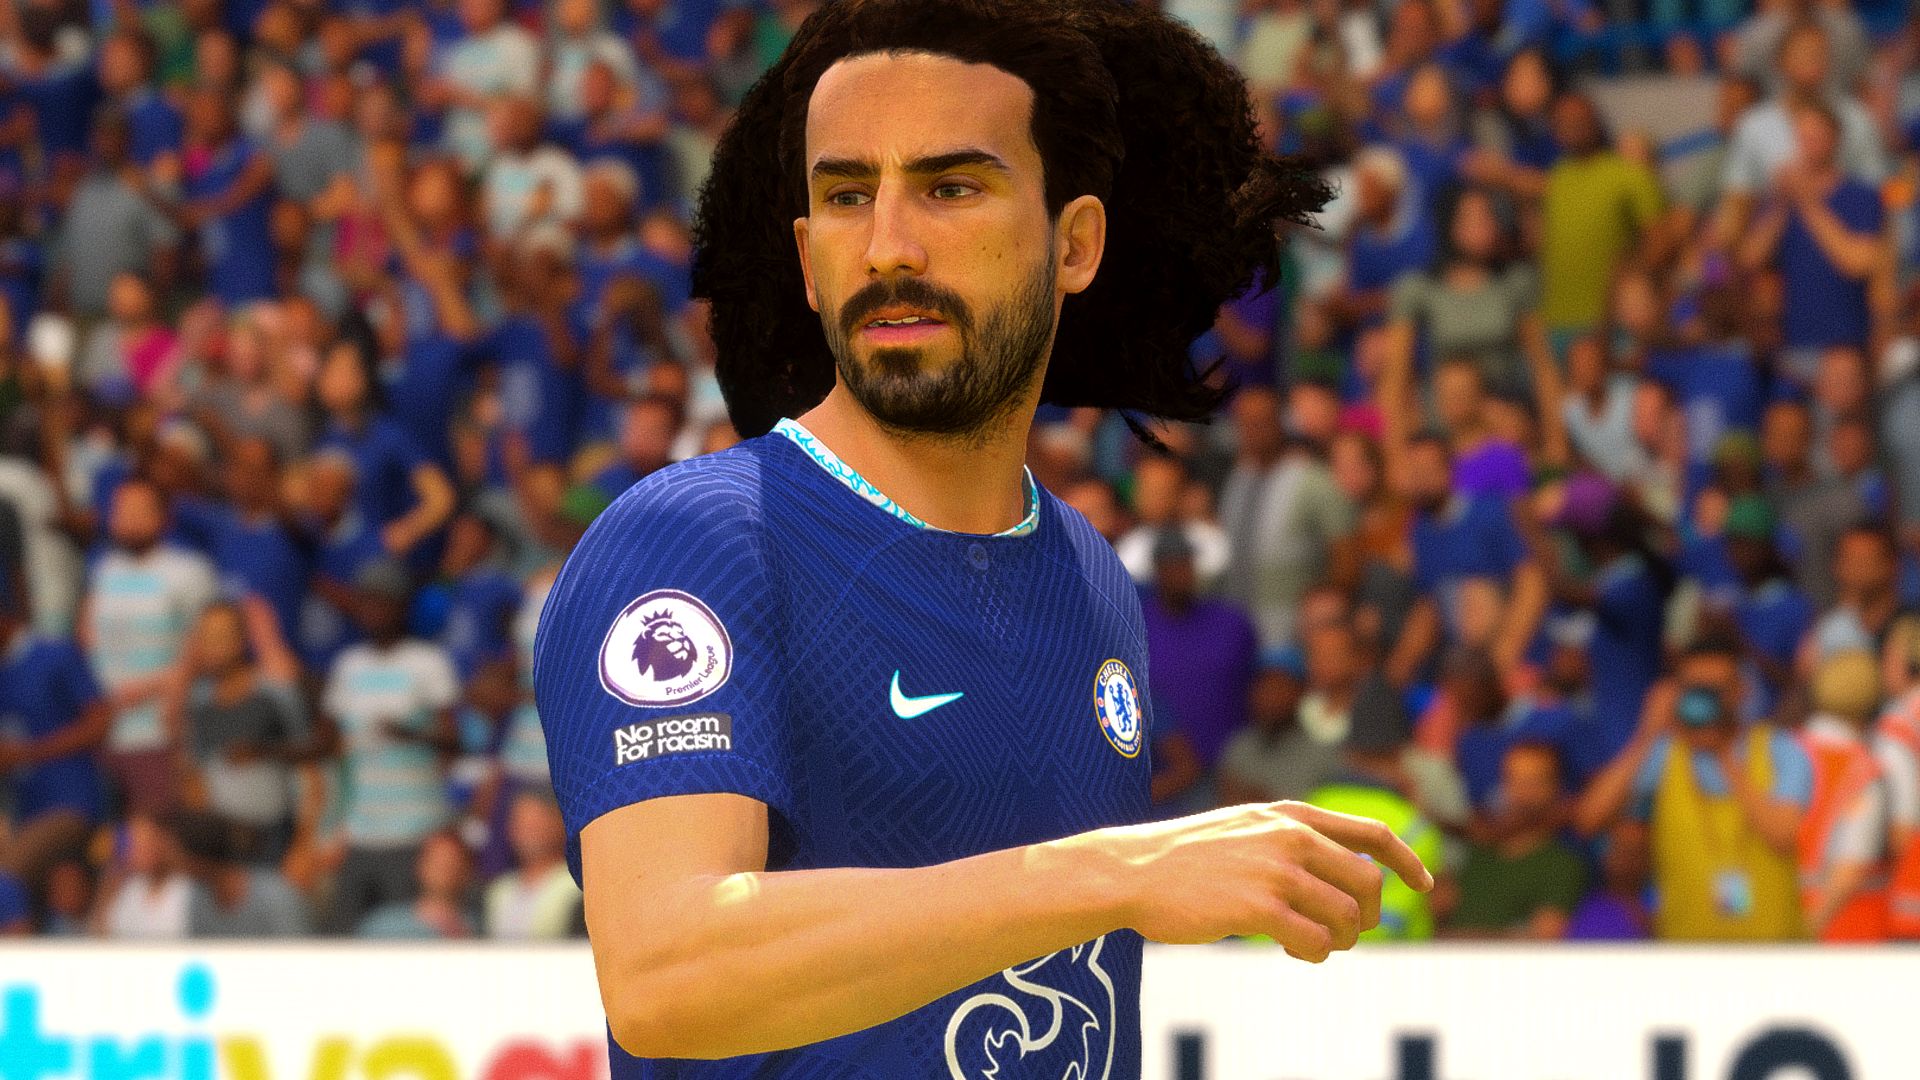 FIFA 20 Twitch Prime pack: How you can get a free TOTS player on loan